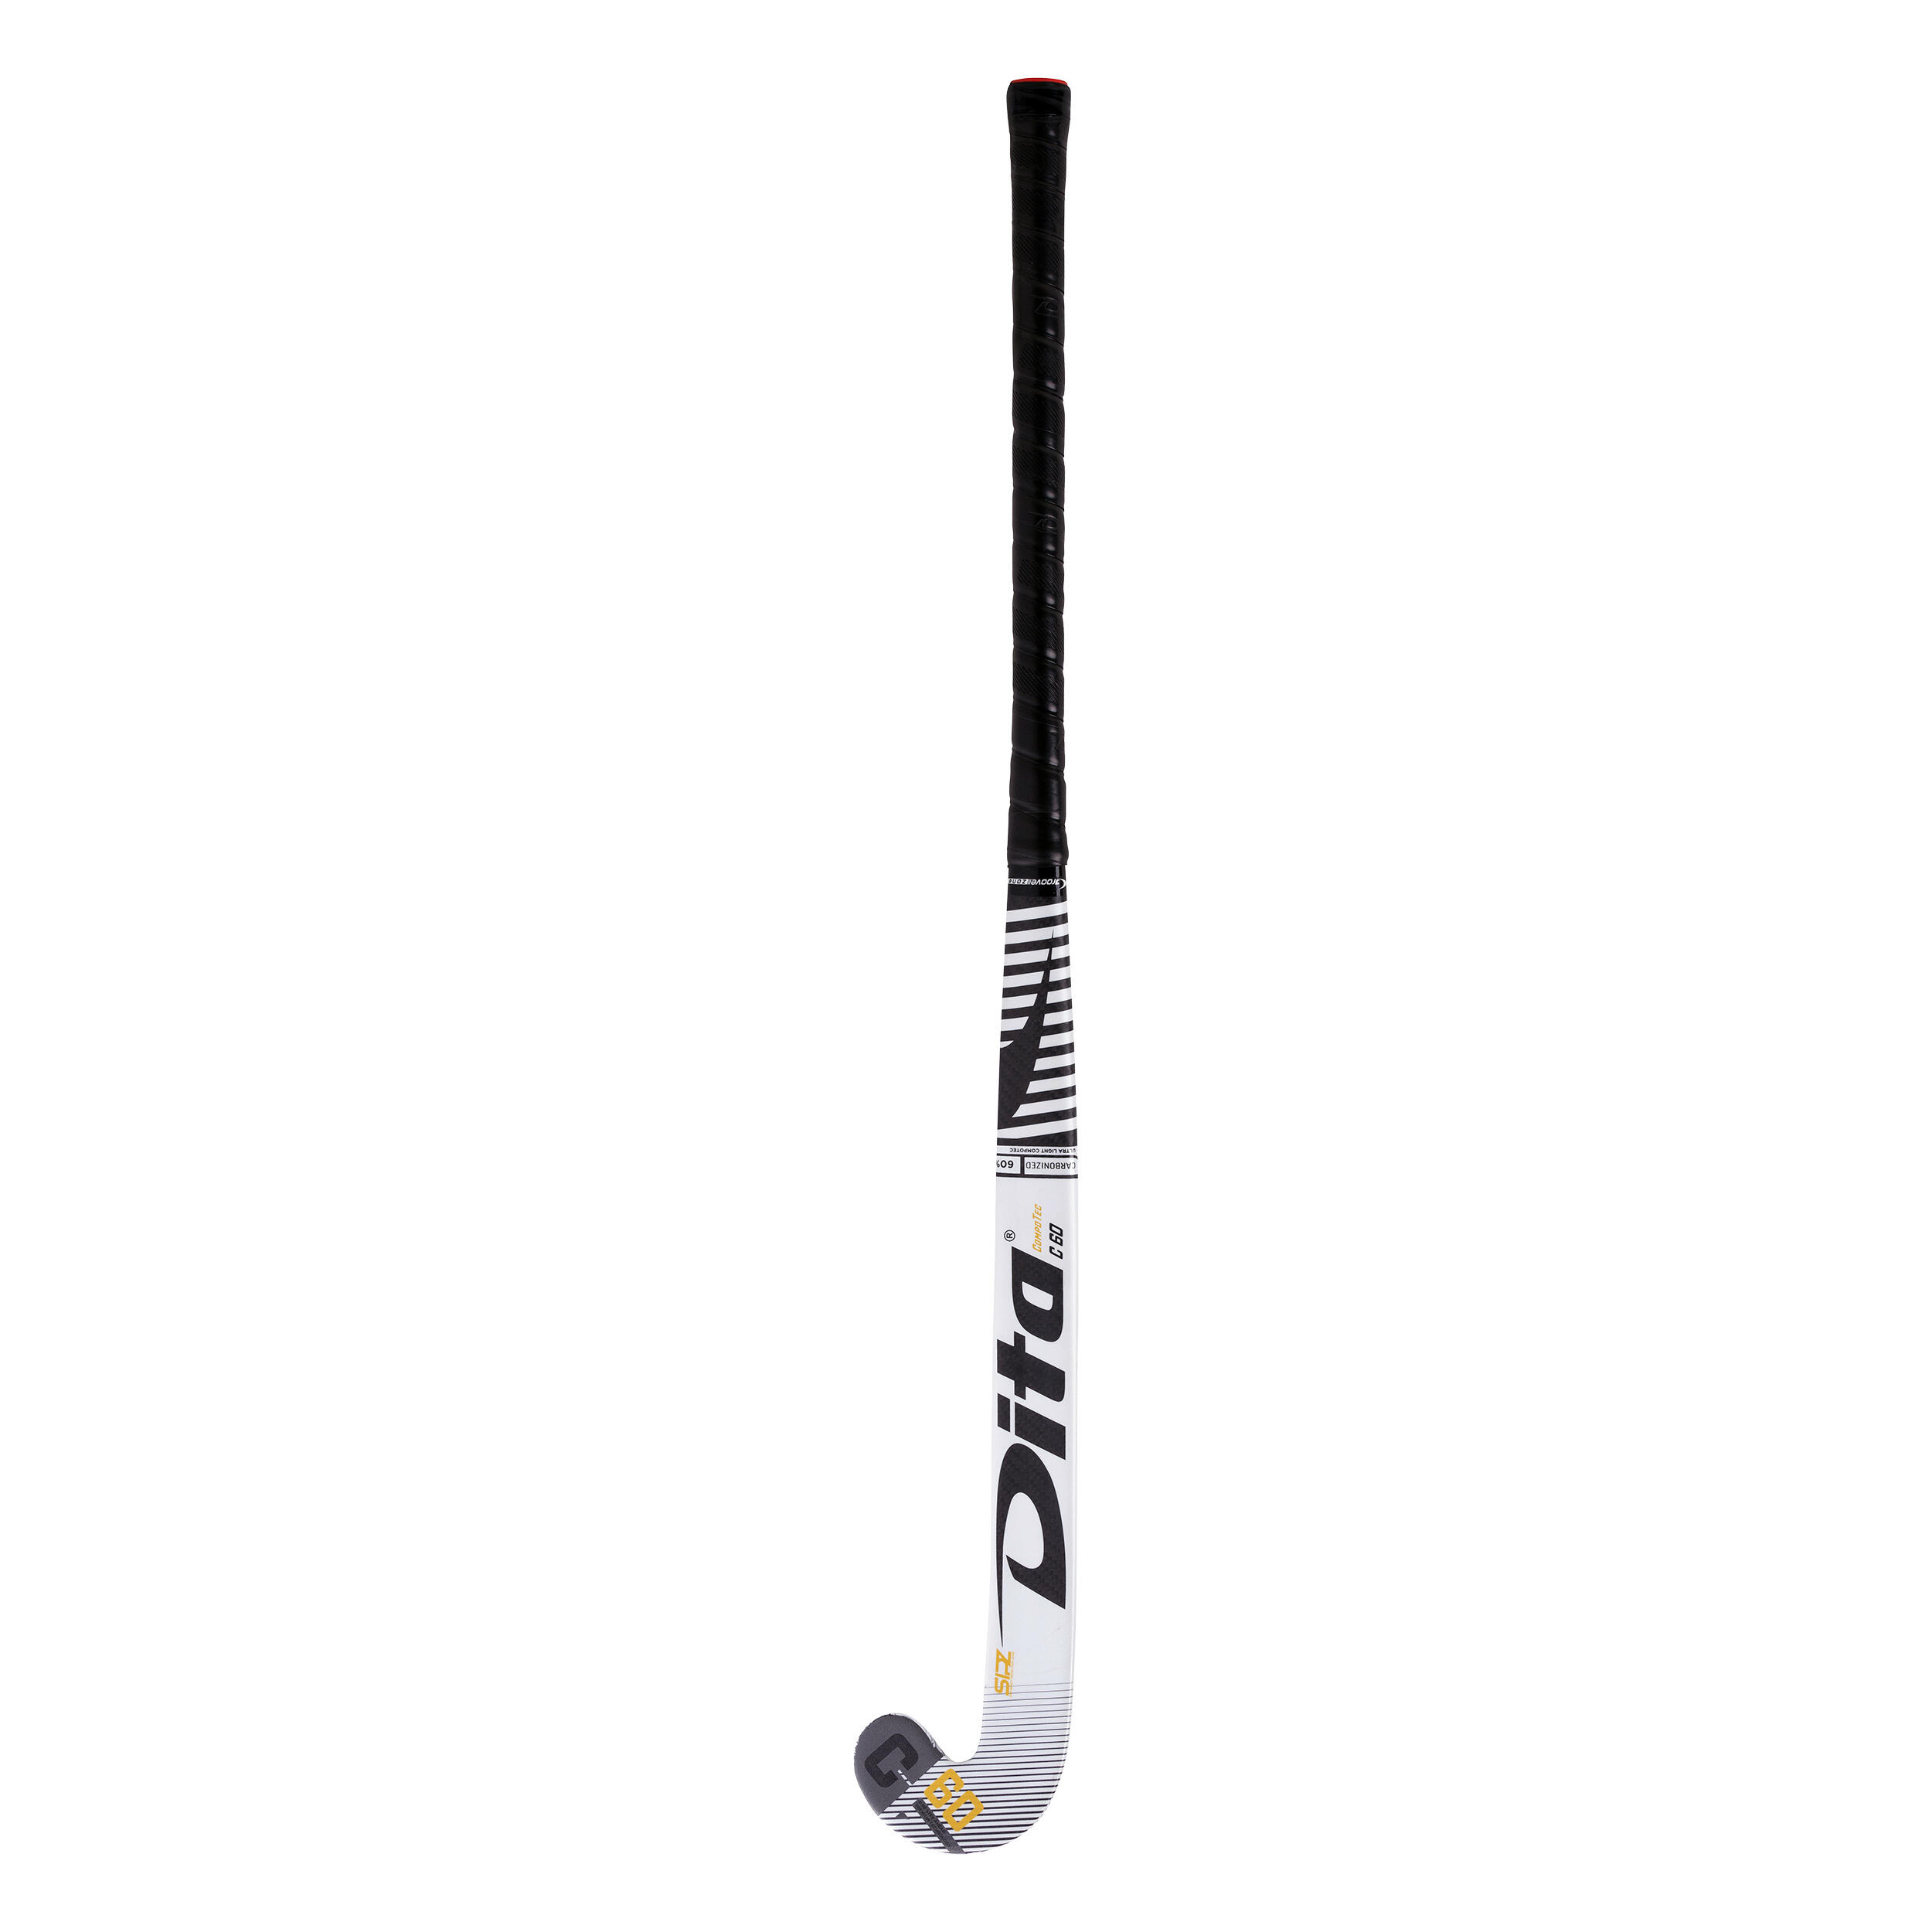 Adult Intermediate 60% Carbon Low Bow Field Hockey Stick CompotecC60 - White/Black 5/12